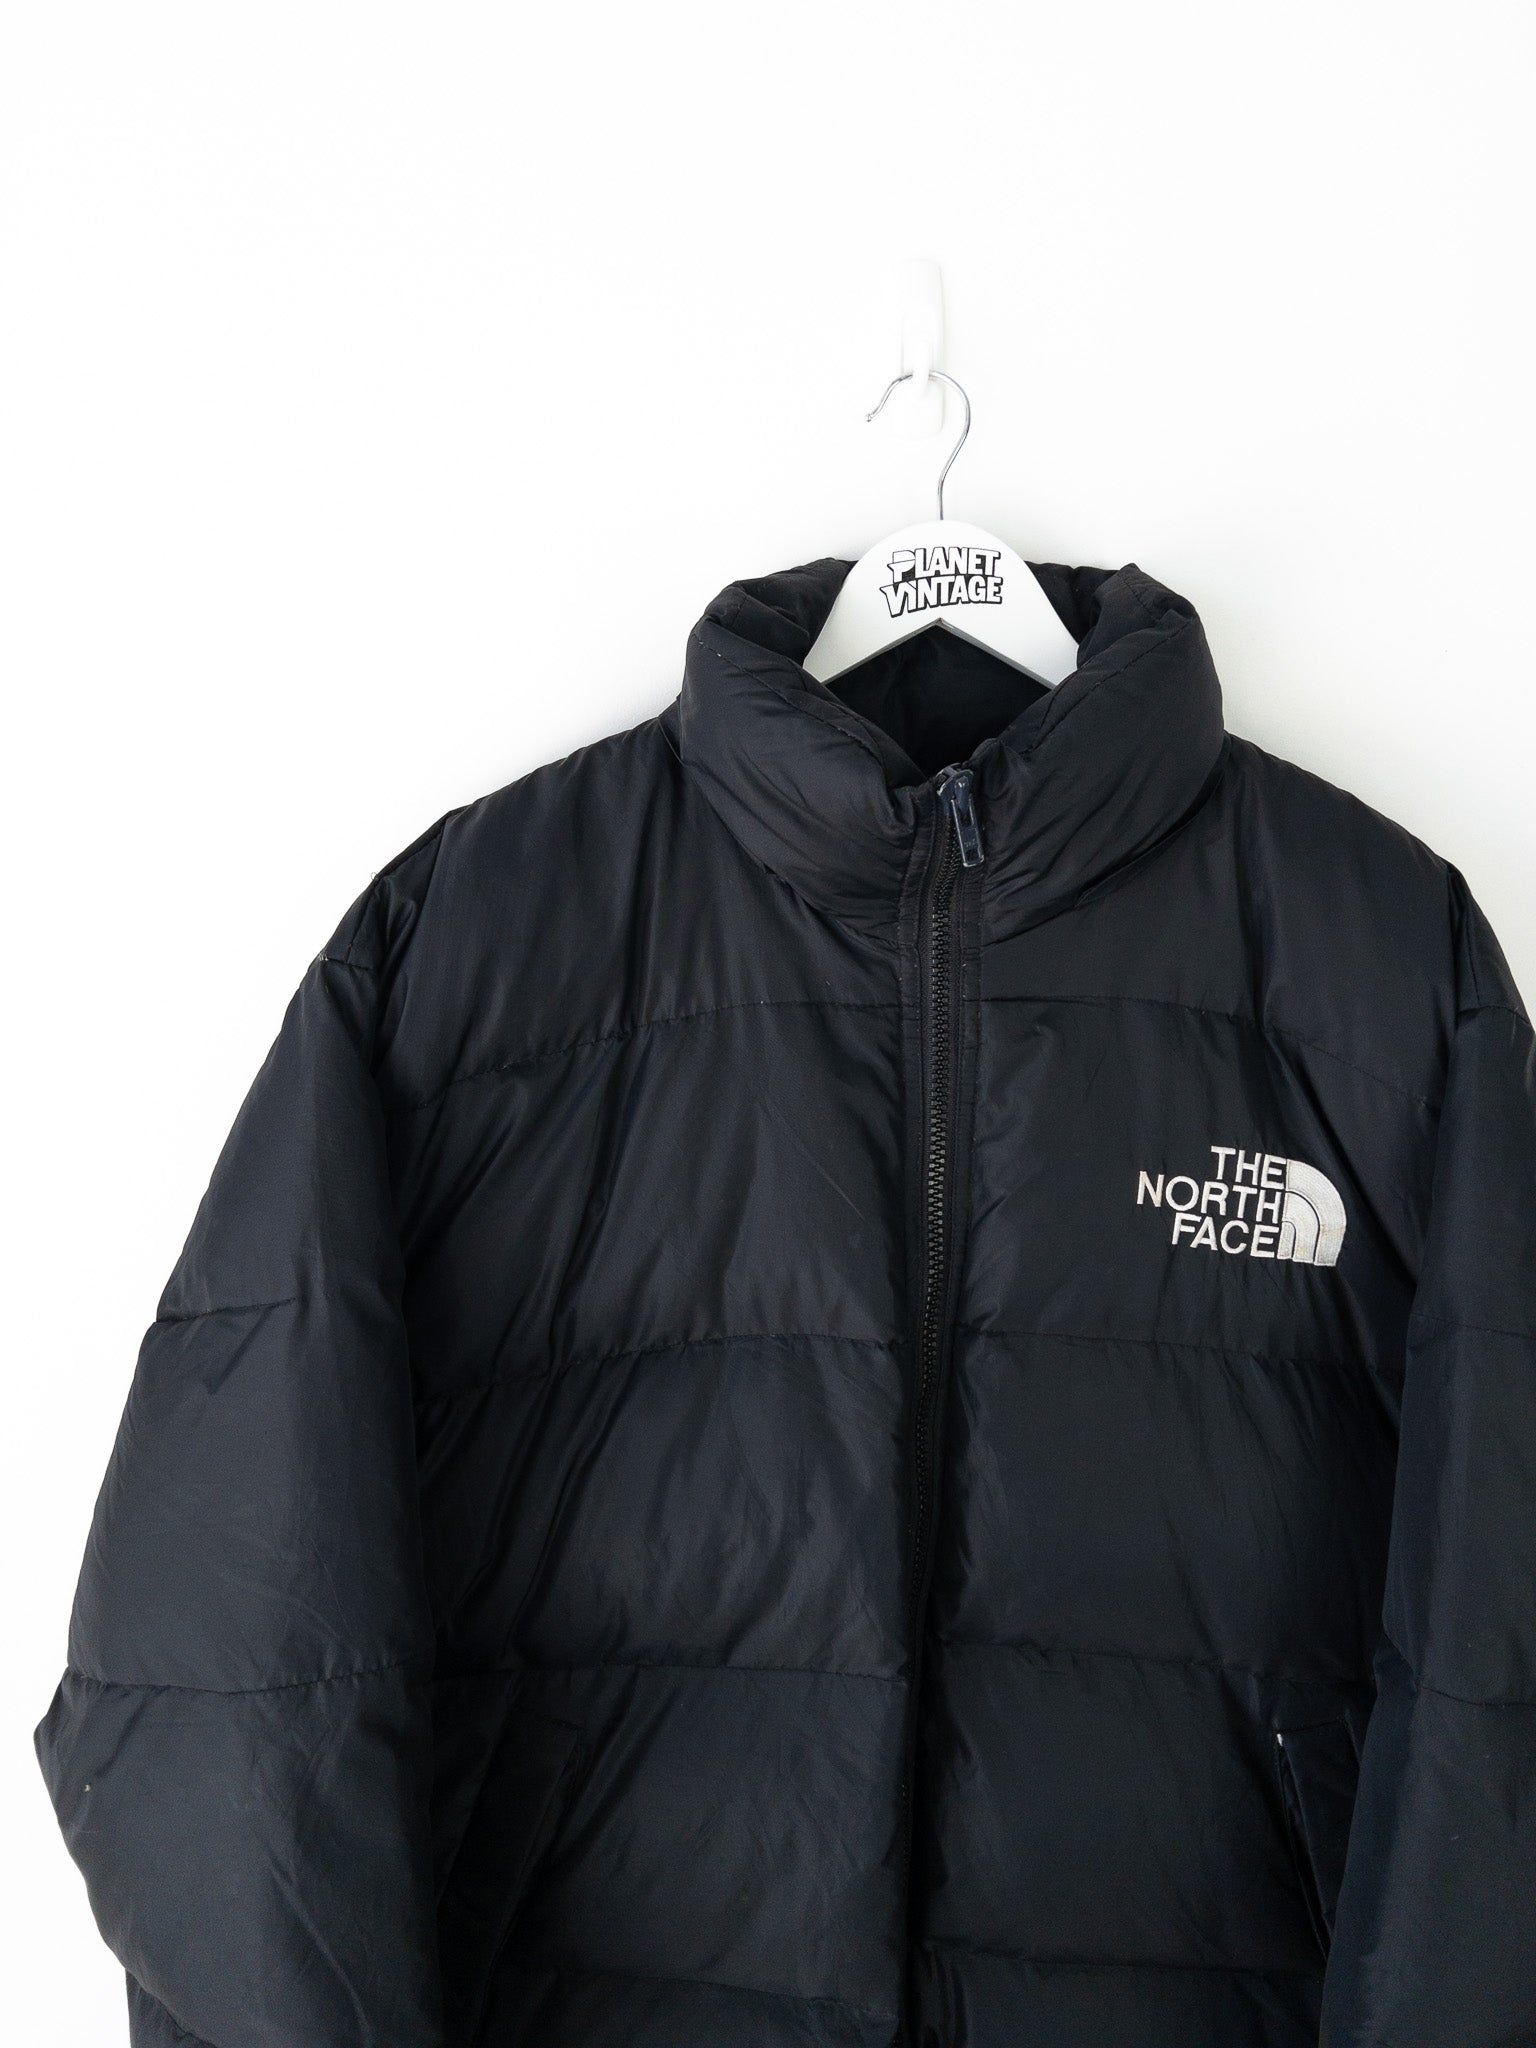 Vintage The North Face Puffer Jacket (XL)